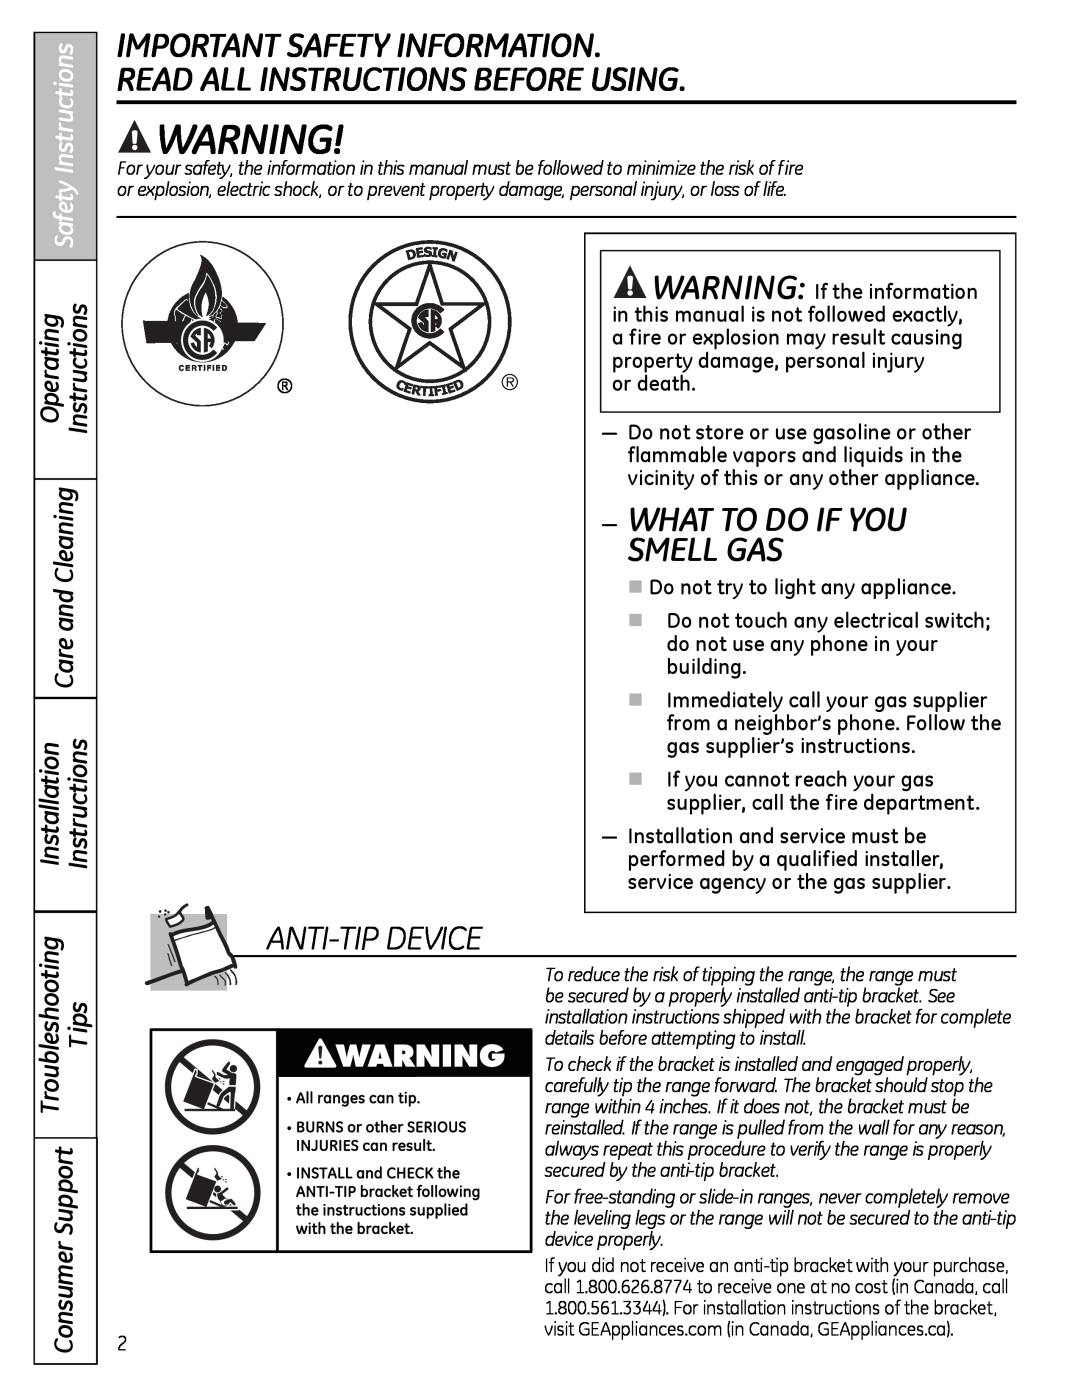 GE JgB290 Important Safety Information Read All Instructions Before Using, What To Do If You, Smell Gas, aNTI-TIP DeVICe 